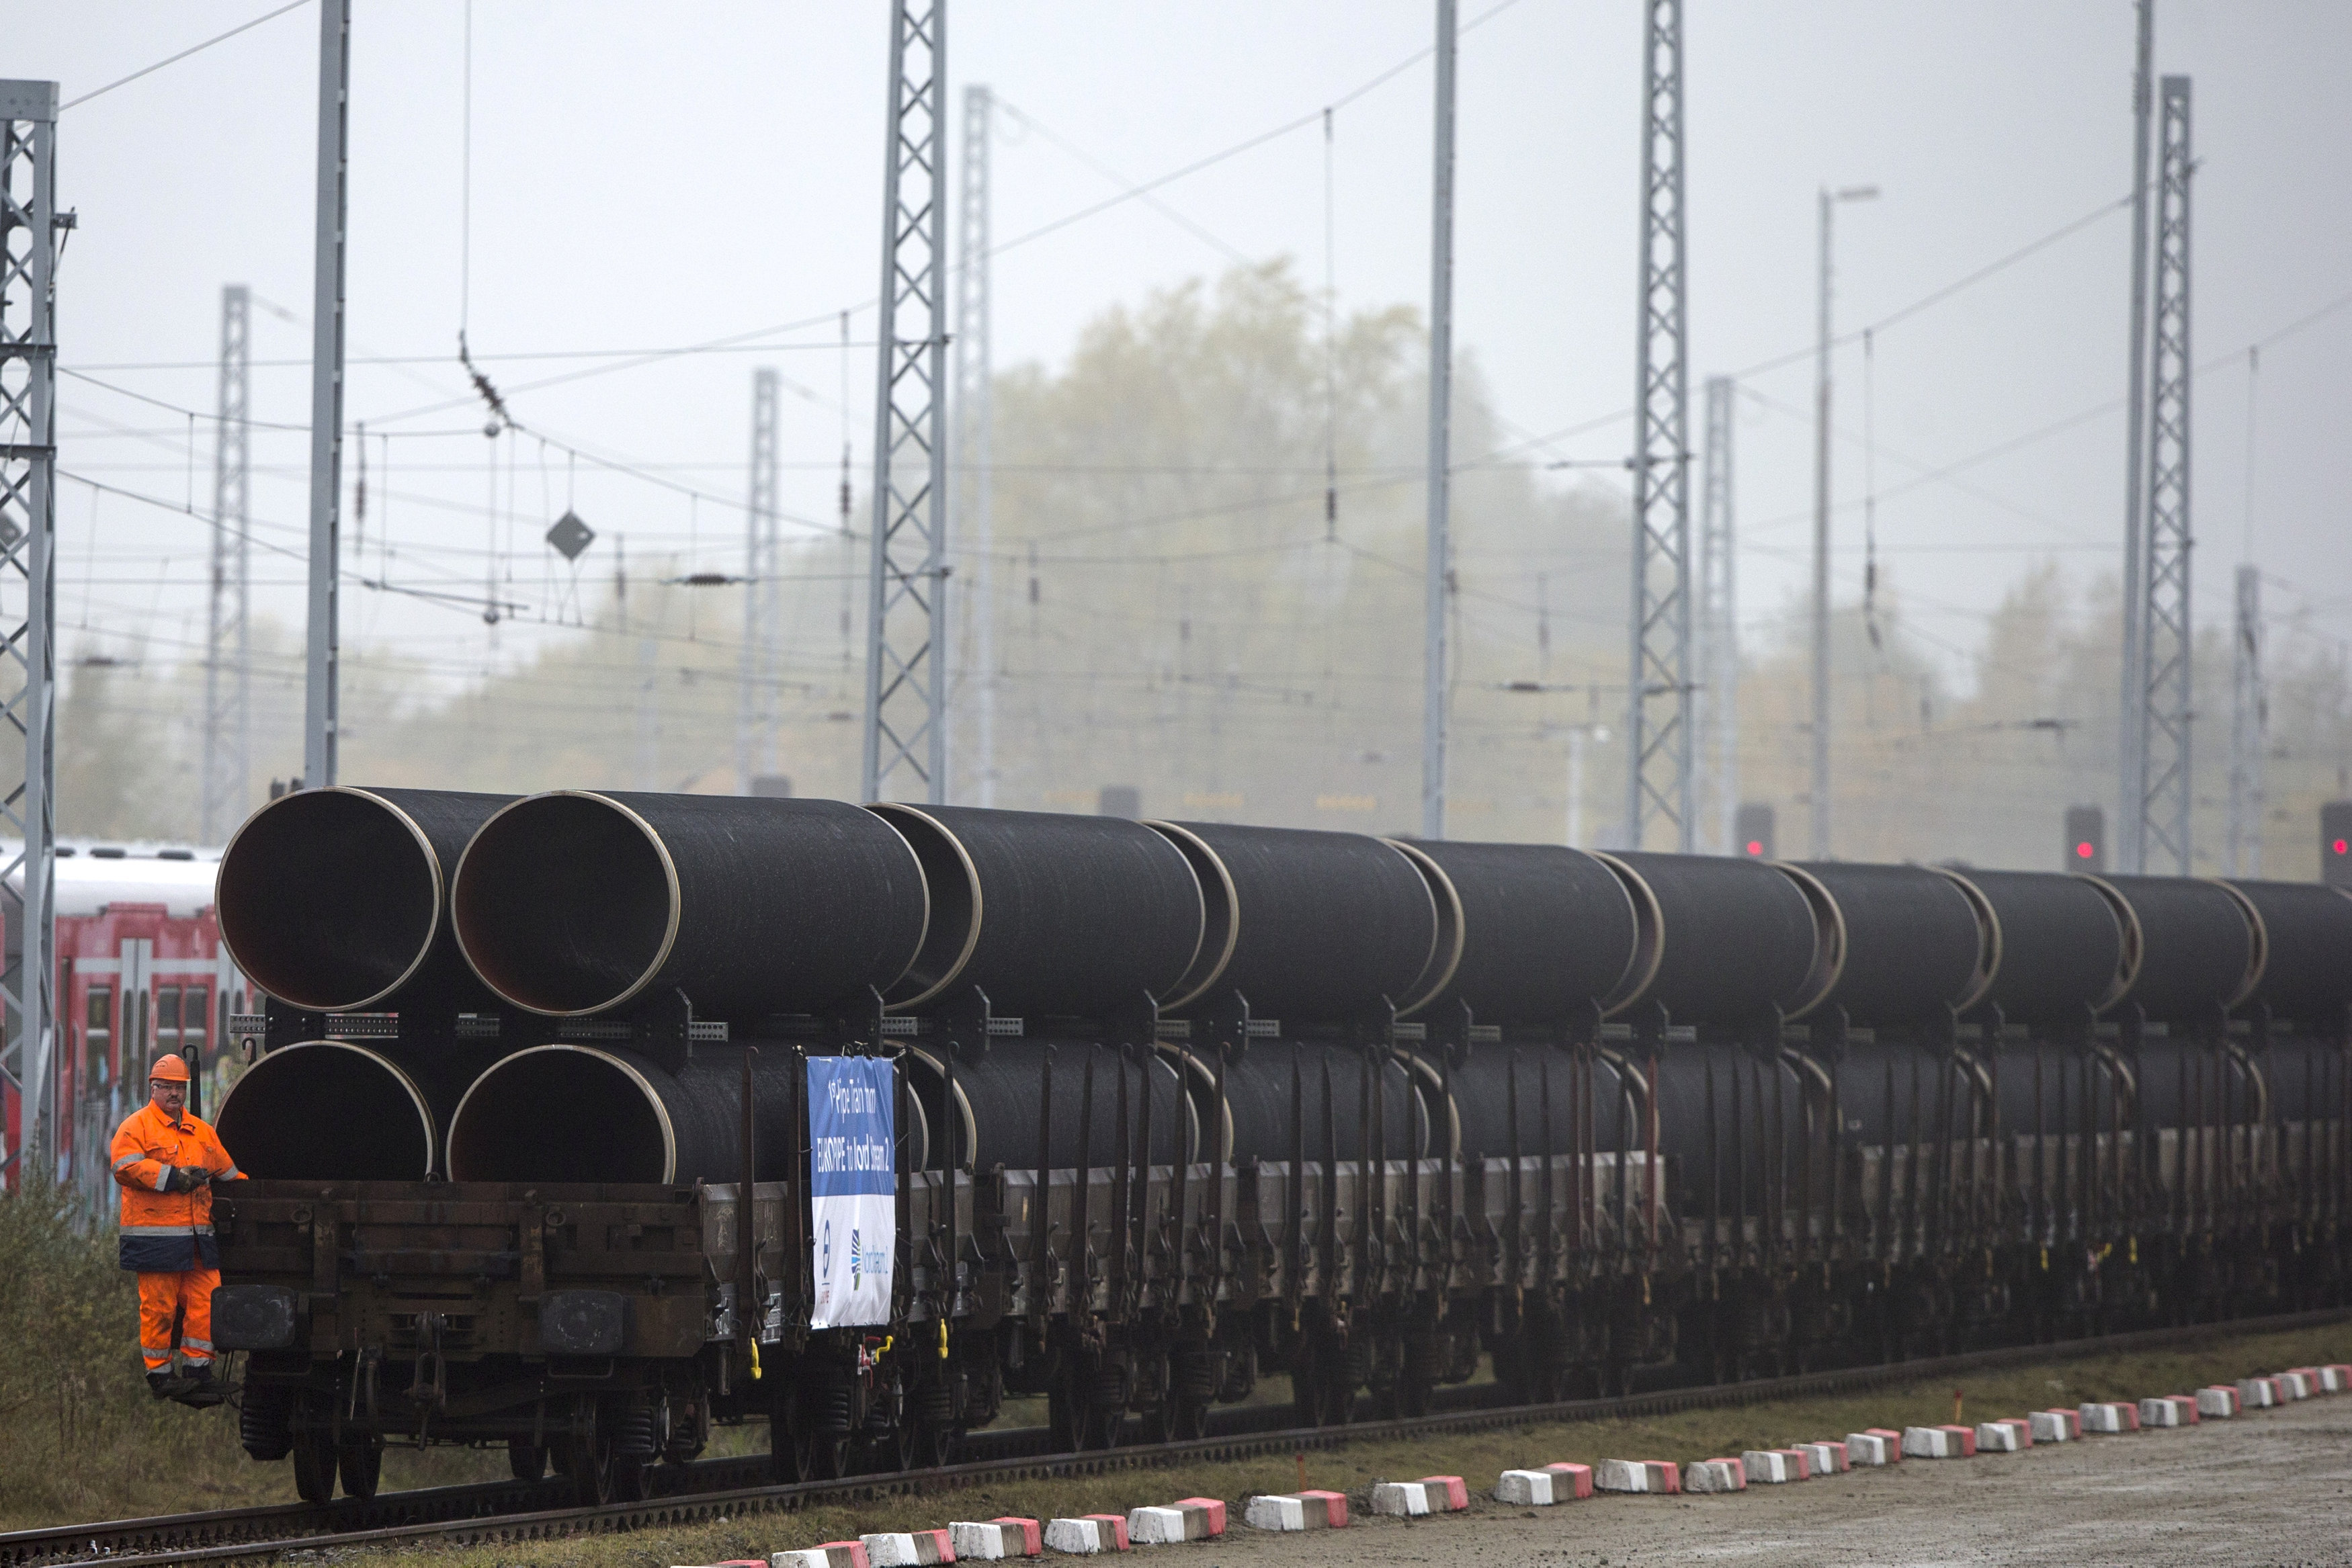 A handout by Nord Stream 2 claims to show the first pipes for the Nord Stream 2 pipeline being delivered by rail to the German logistics hub Mukran on the island of Rugen, Germany, in this undated photo provided to Reuters on March 23, 2017. Axel Schmidt/Courtesy of Nord Stream 2/Handout via REUTERS